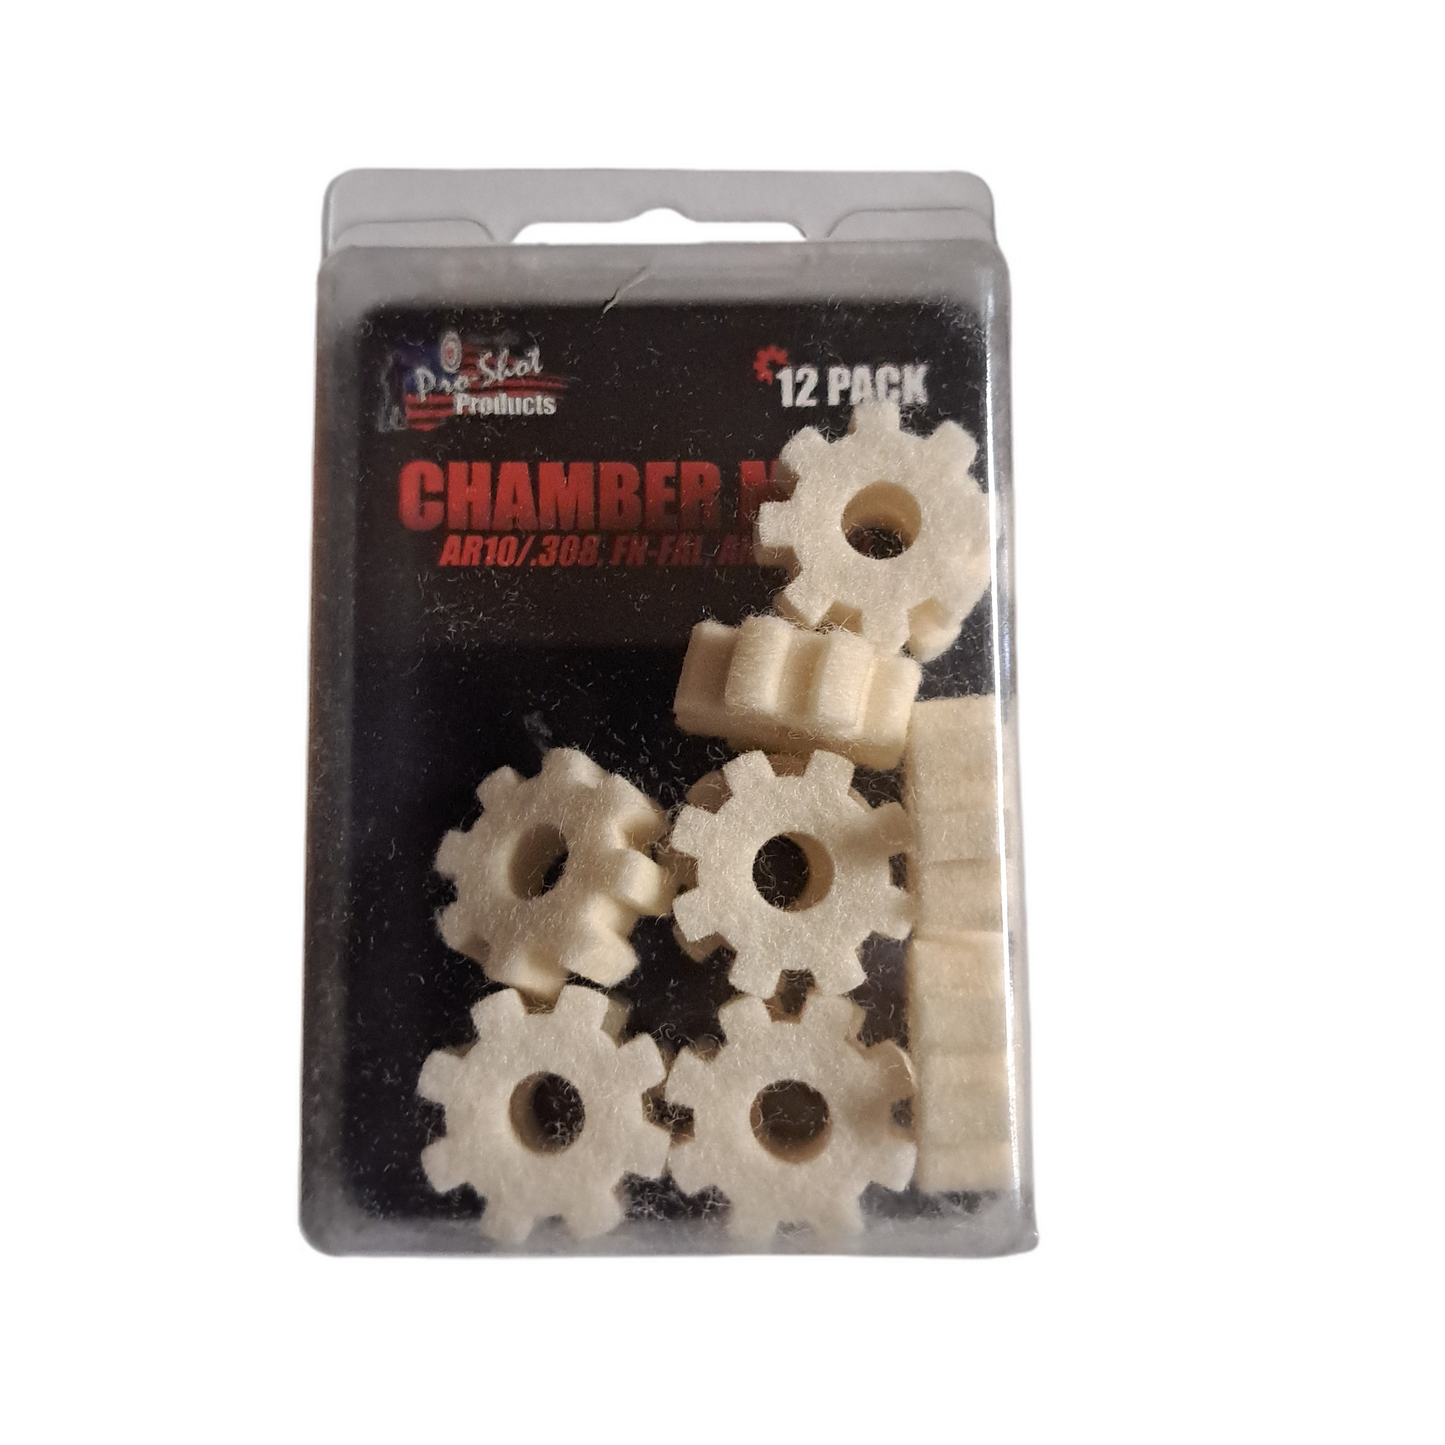 Pro Shot Products Chamber Maid 12 Pack